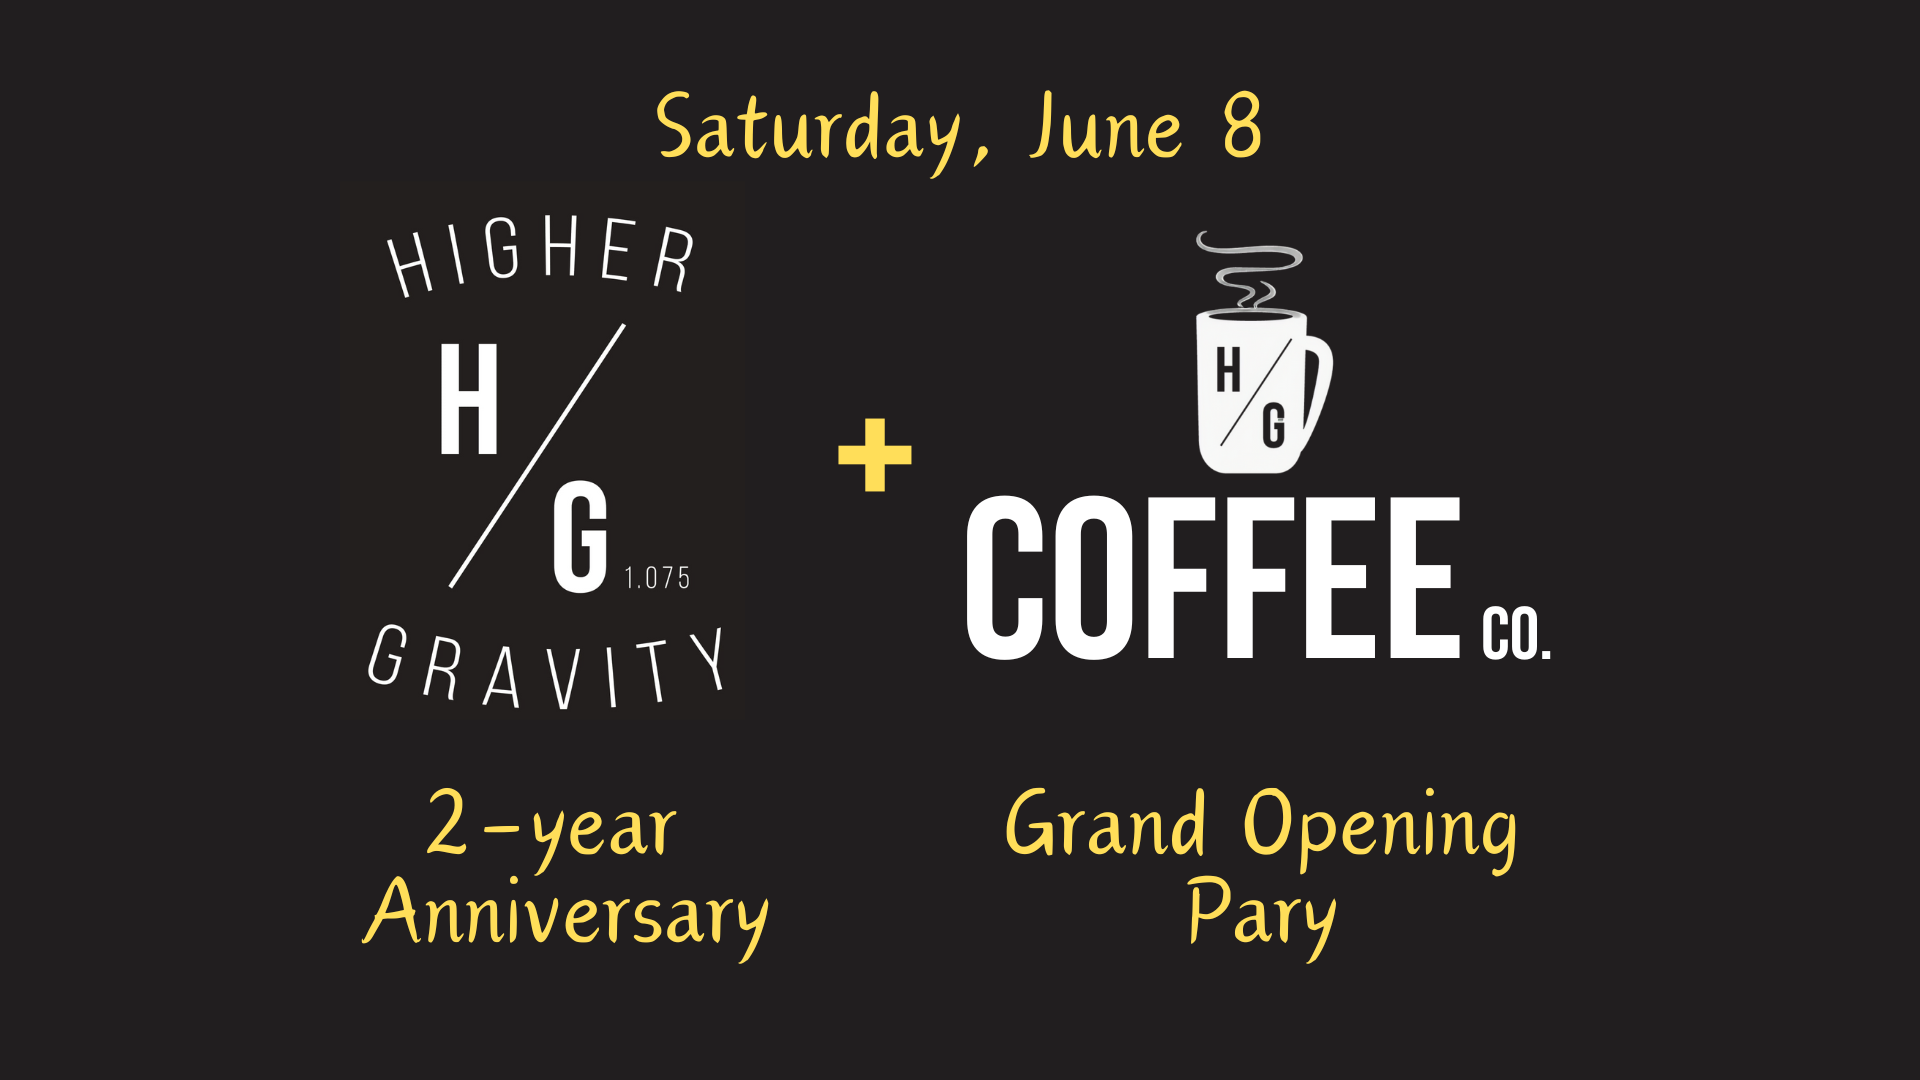 Join Higher Gravity for our 2-year anniversary and the grand opening party for our coffee shop, HG Coffee Co